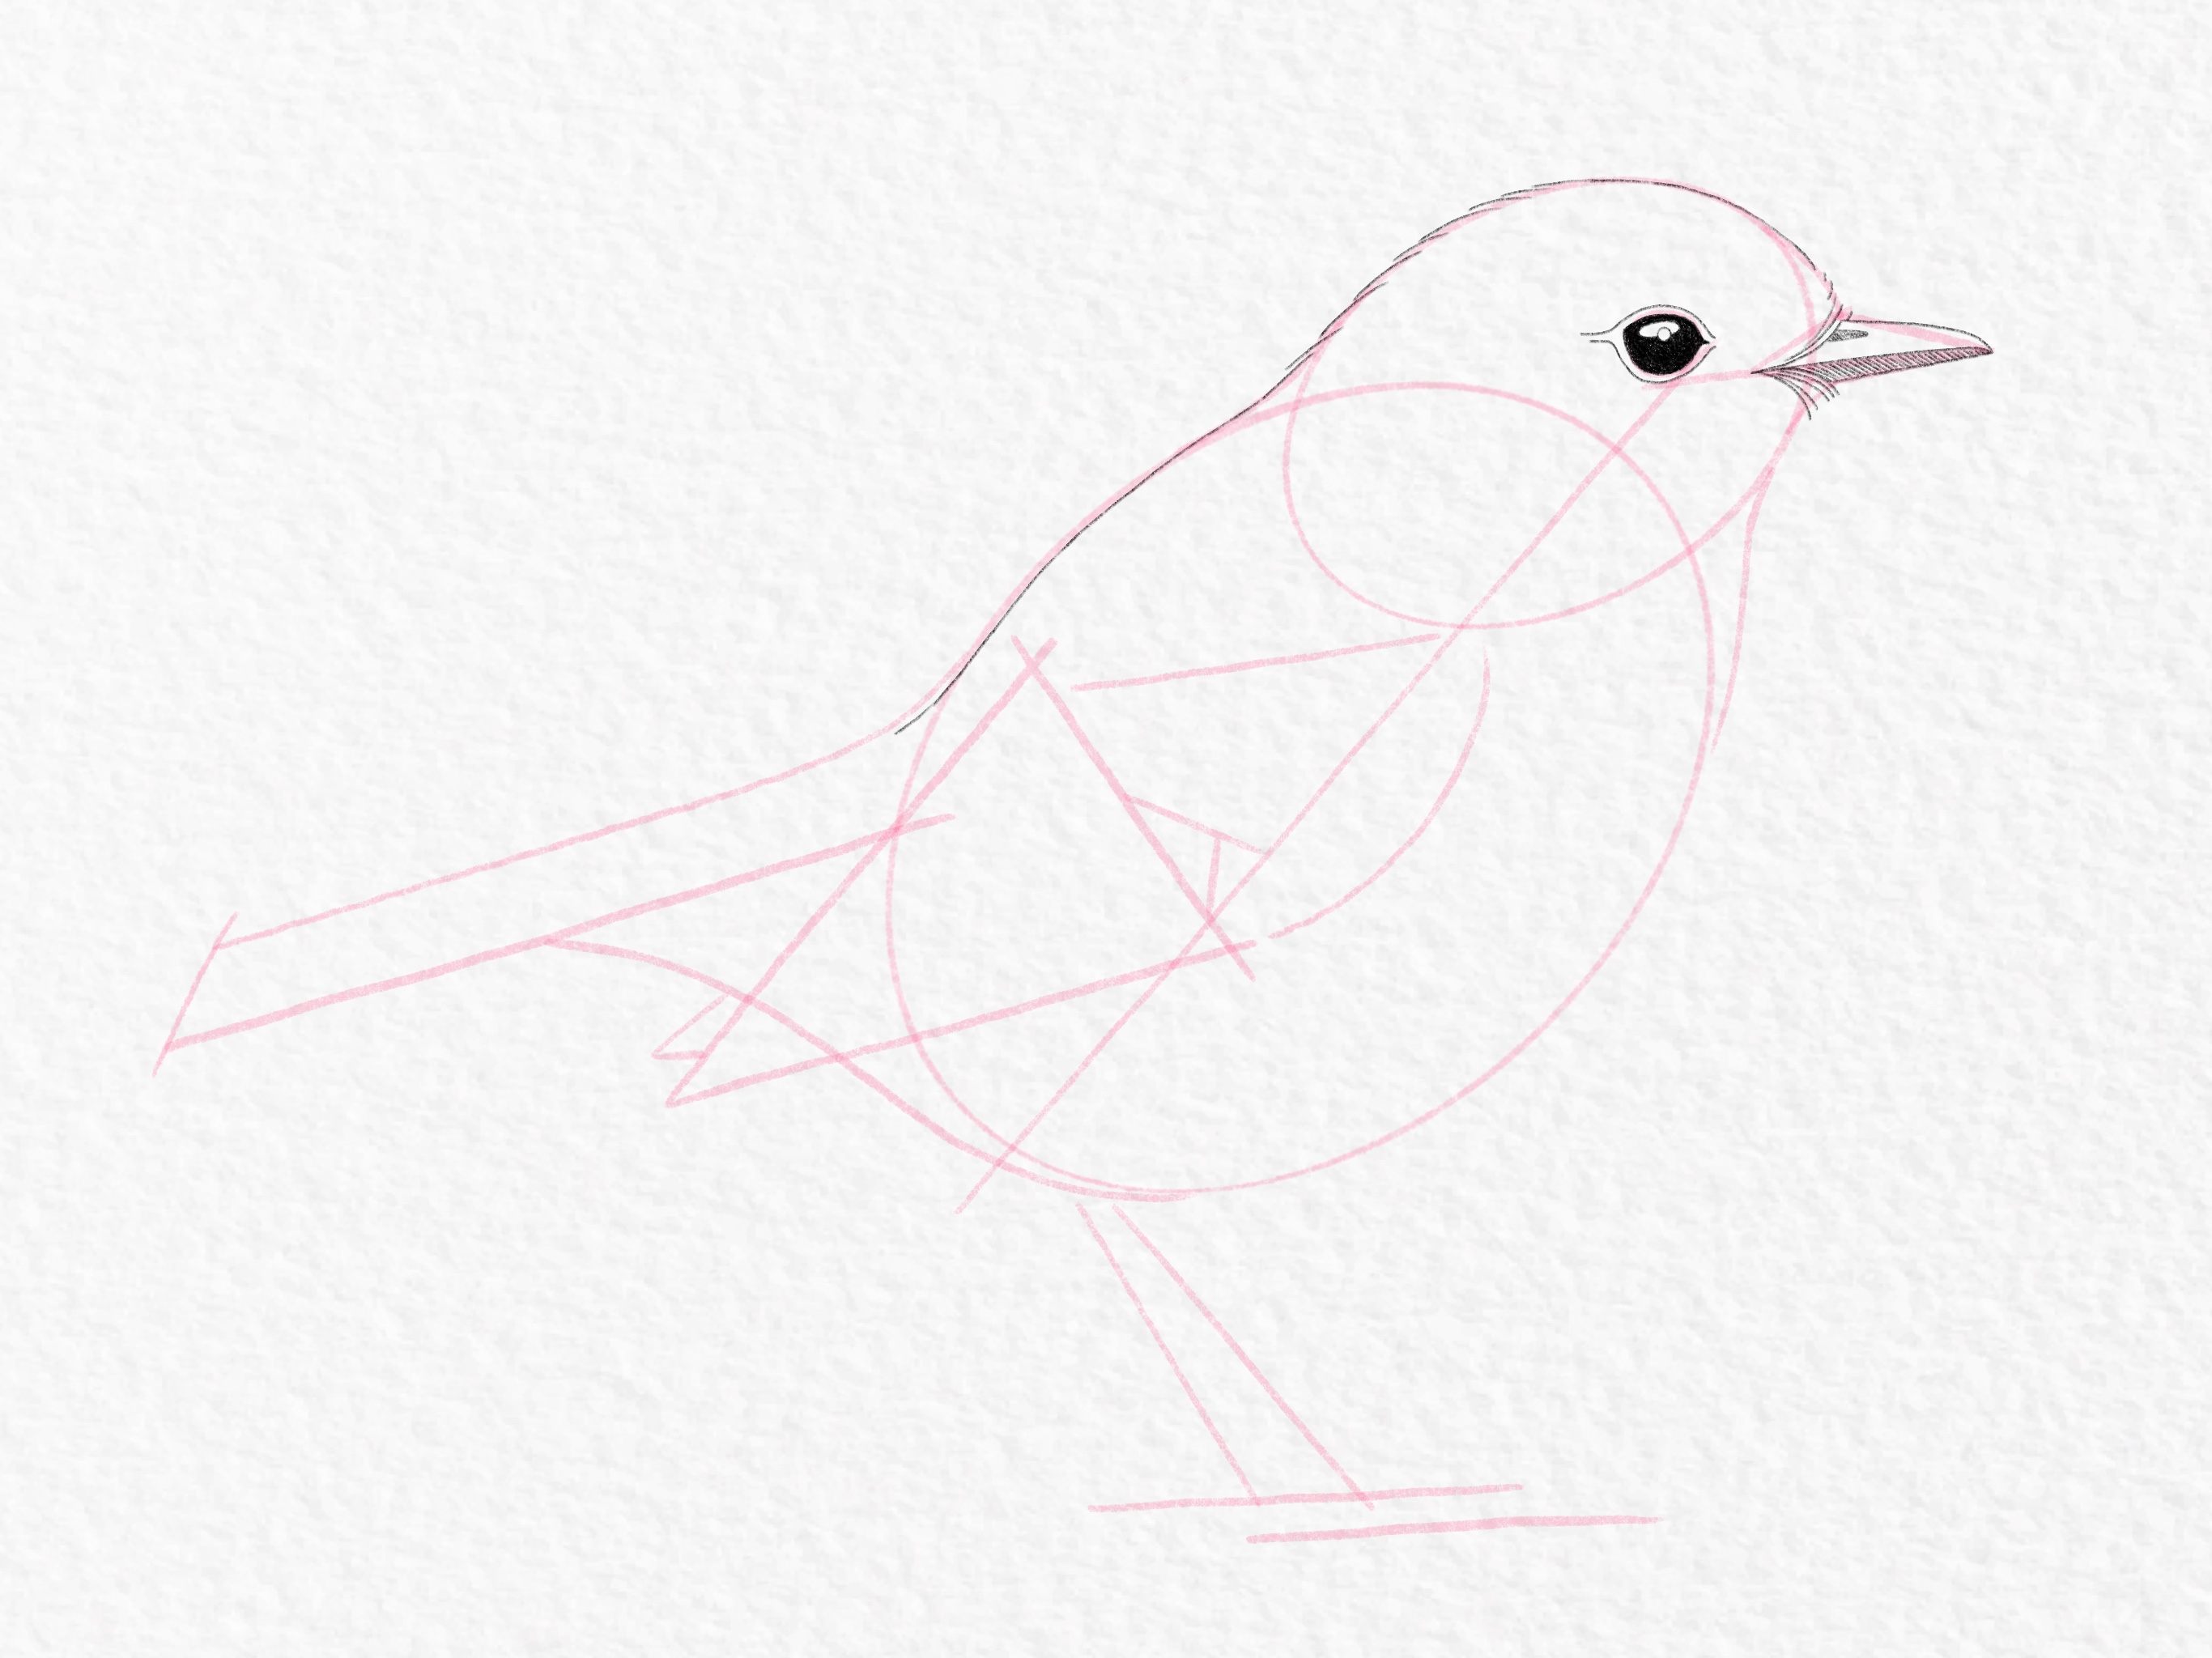 How to draw a beautiful bird by acrylic colour — Hive